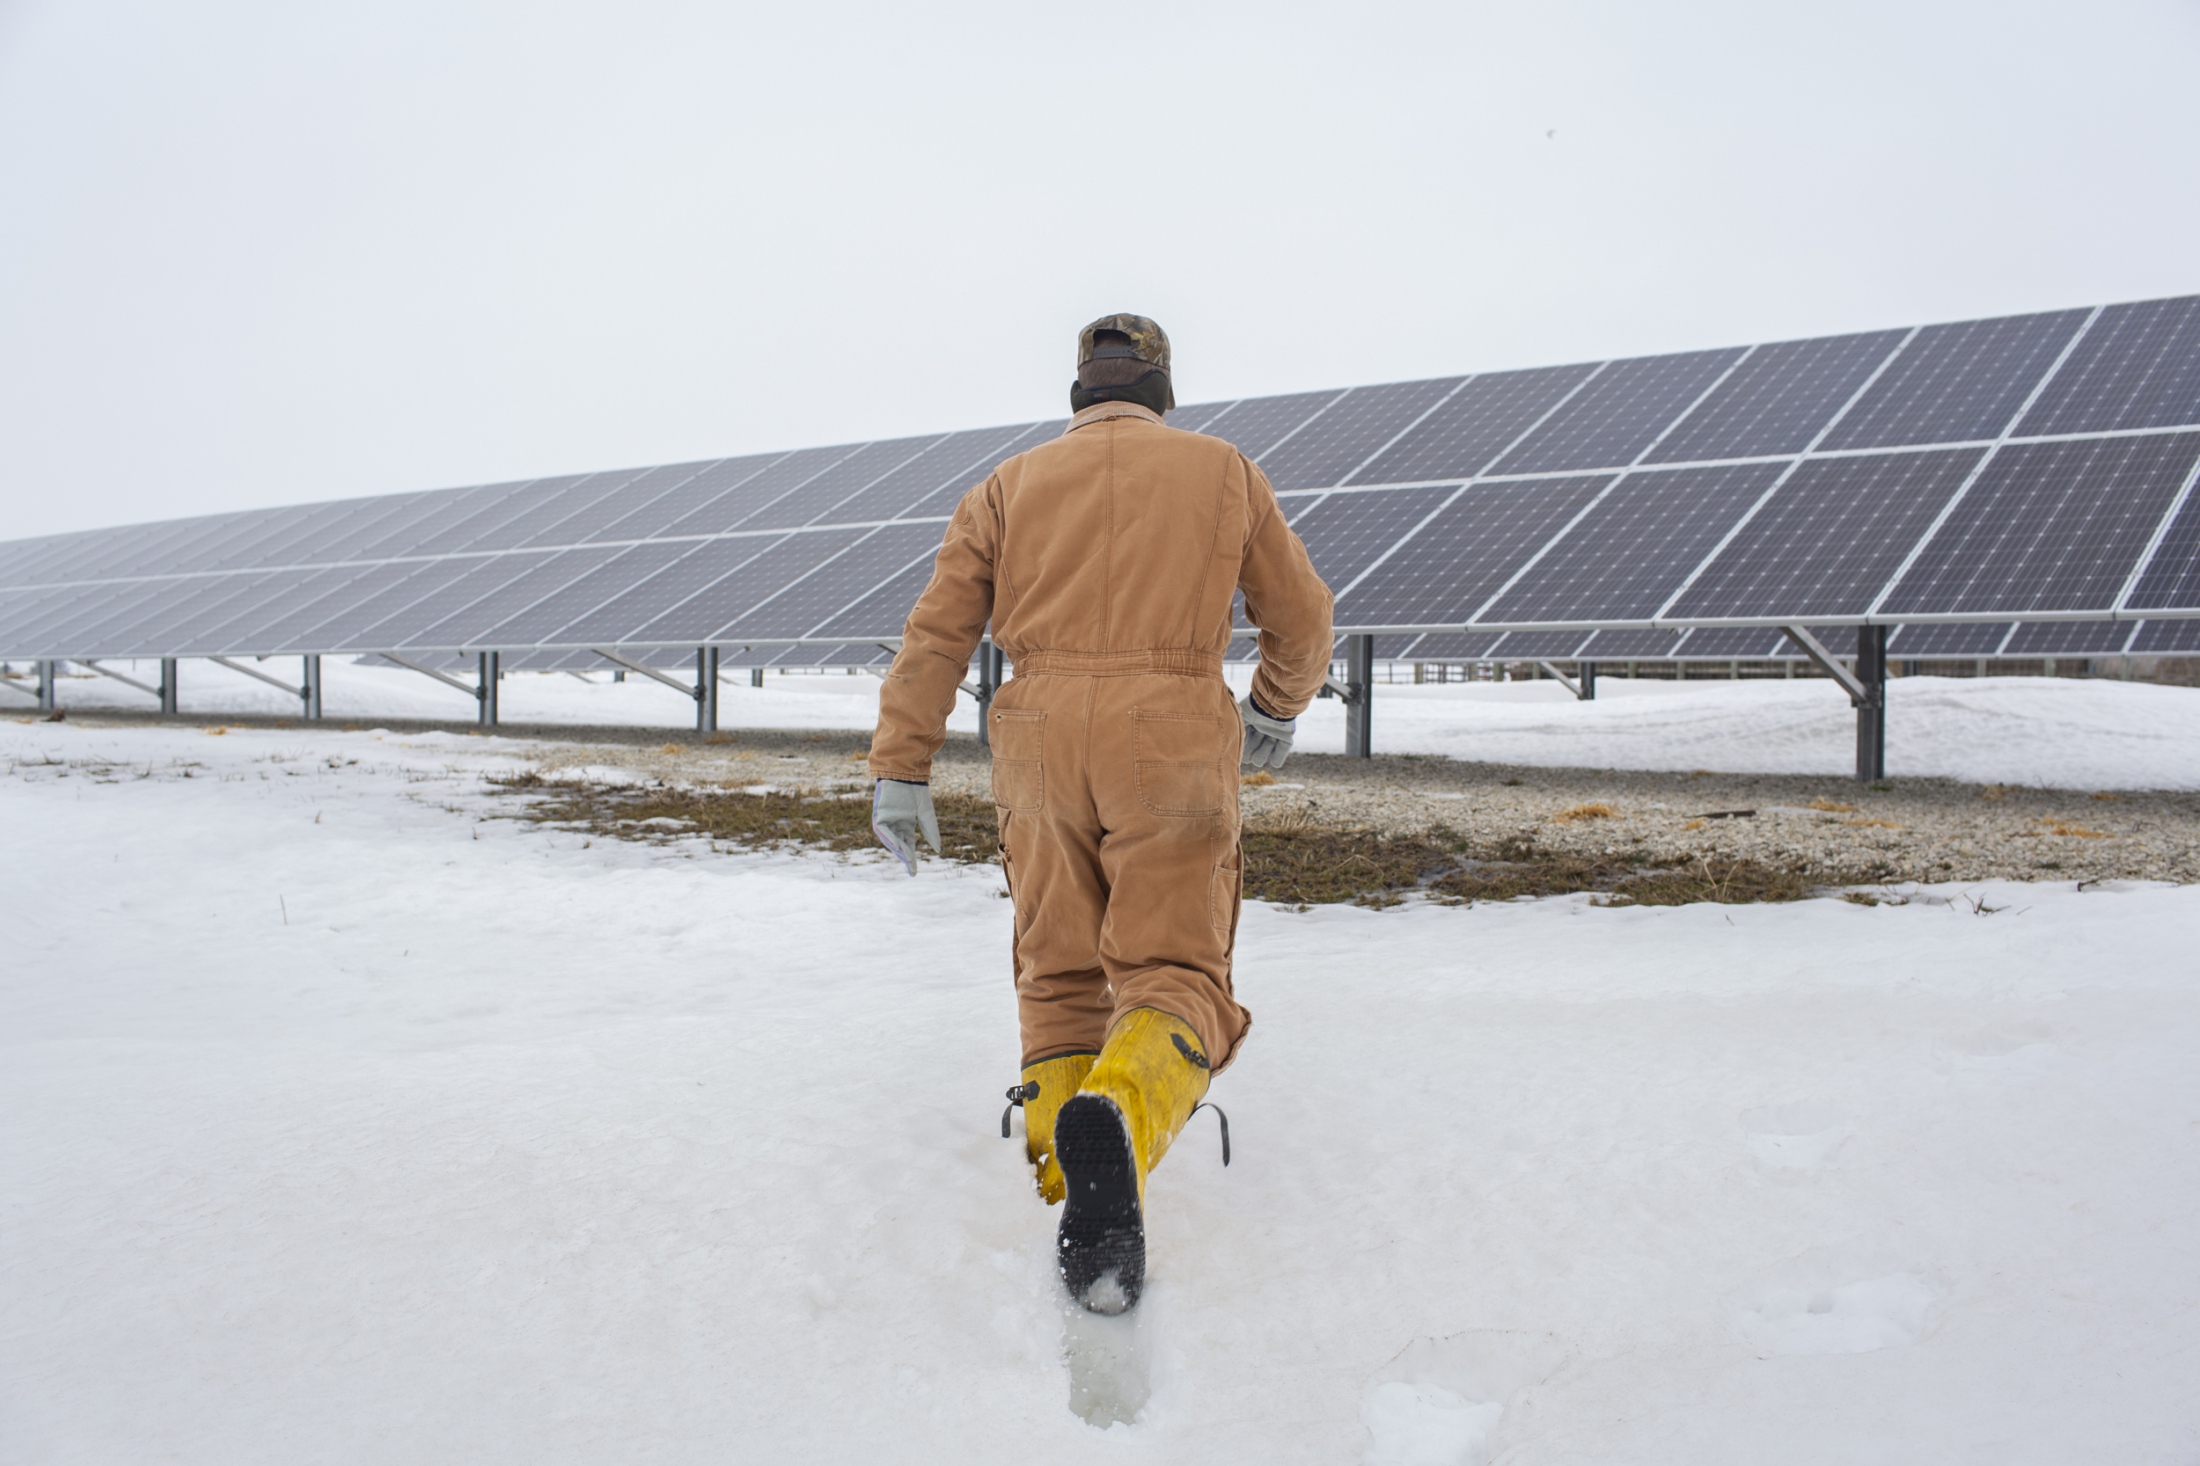 Randy DeBaillie has installed solar panels at his farm in Orion, Ill. Across the flatlands of Illinois, a new crop is rising among the traditional...